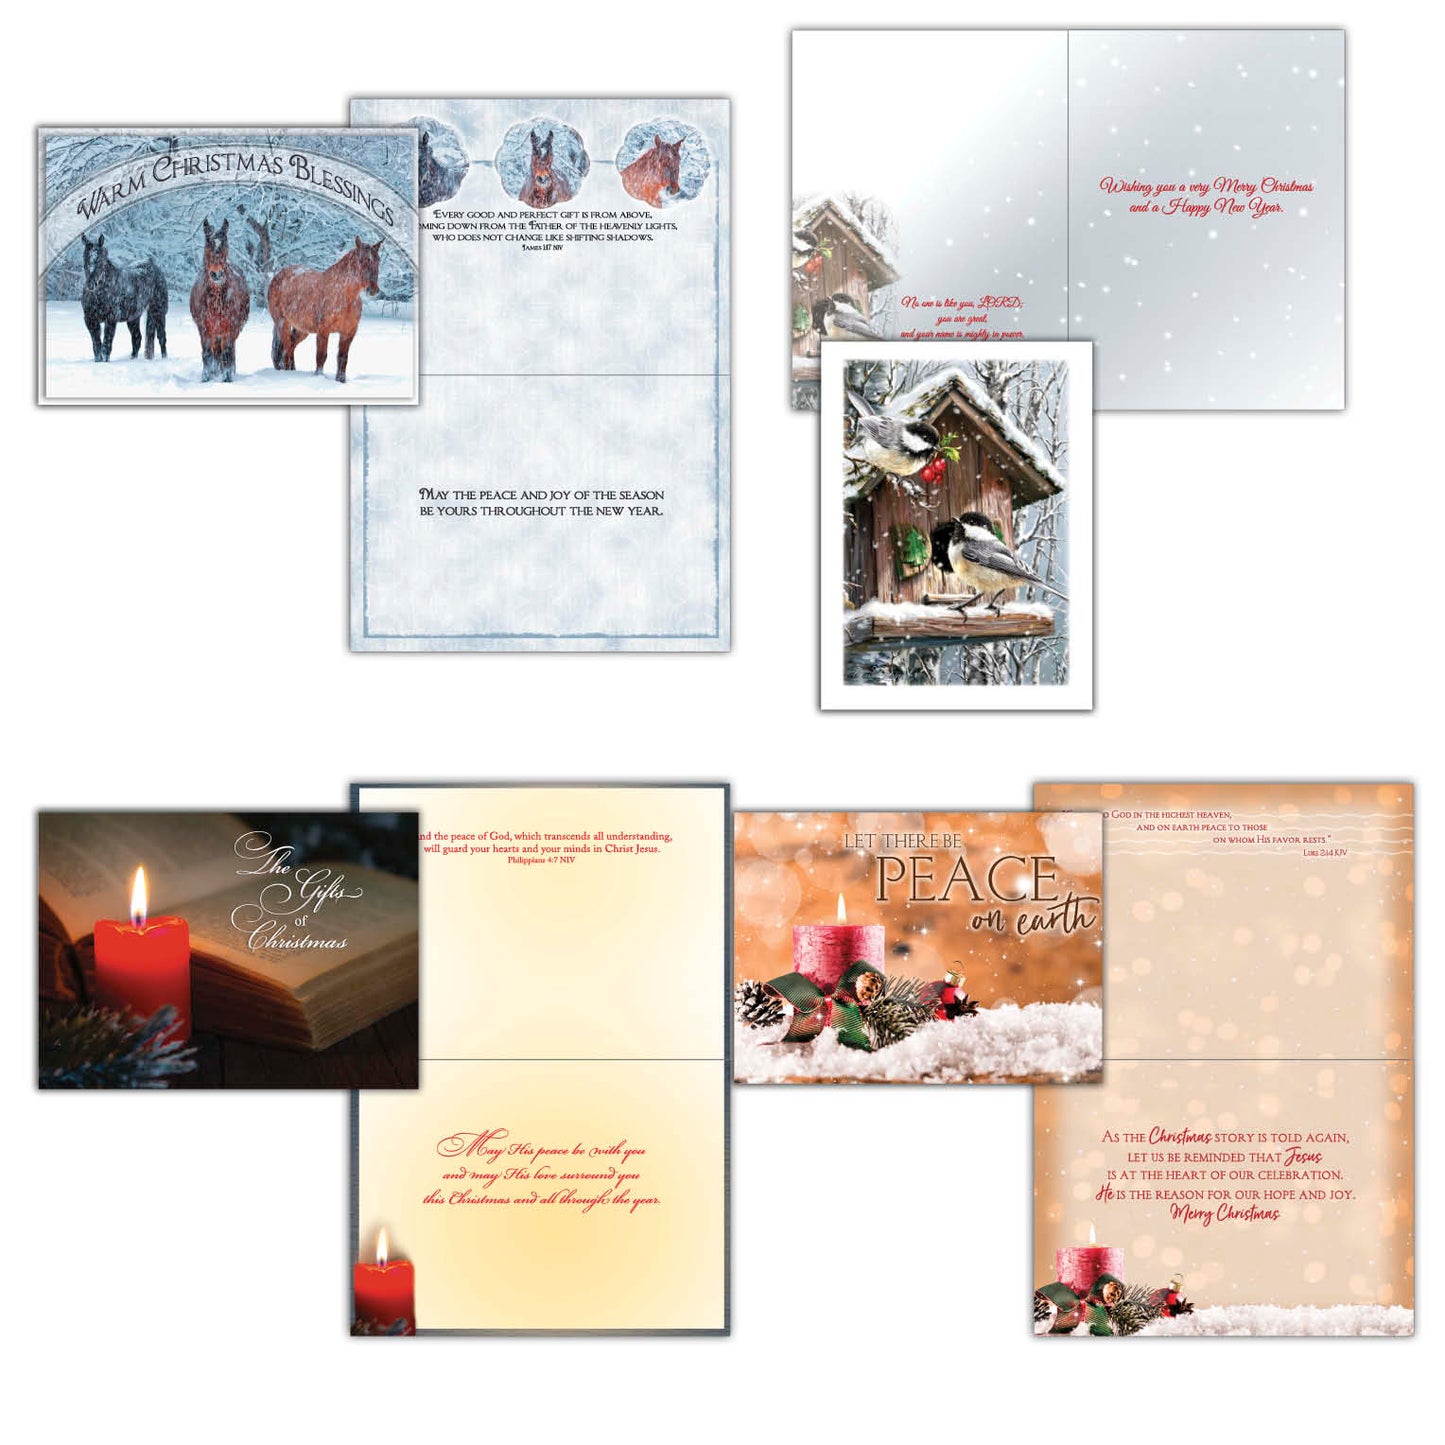 Extra Large Boxed Christmas Card Assortment - Christmas Wonders NIV- 48 Cards and Envelopes